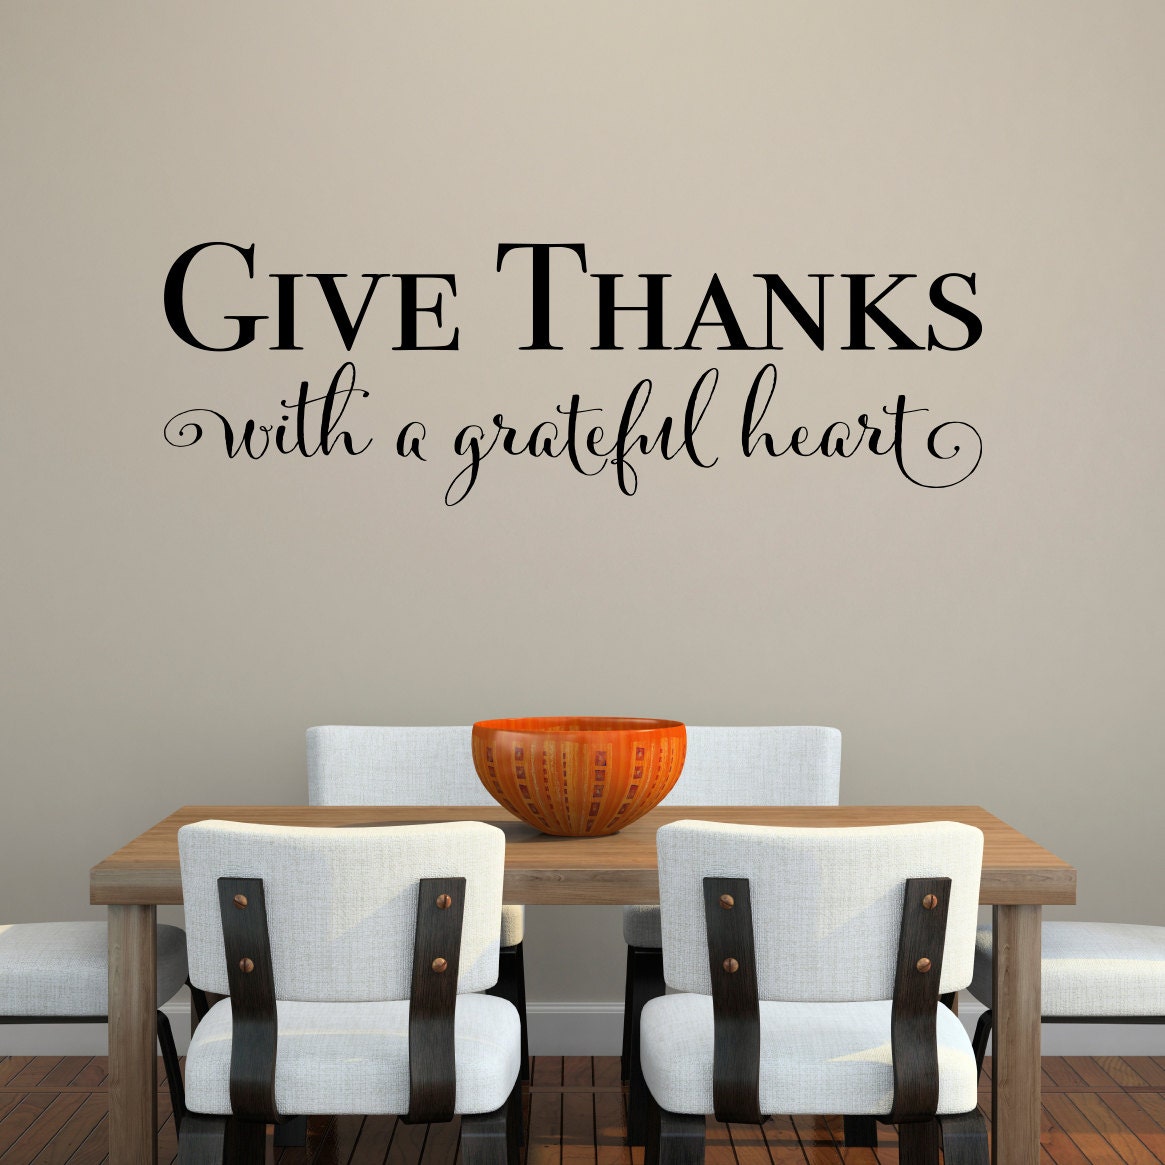 Give Thanks with a Grateful Heart Decal - Give Thanks Quote - Dining Room Decor - Kitchen Wall Art